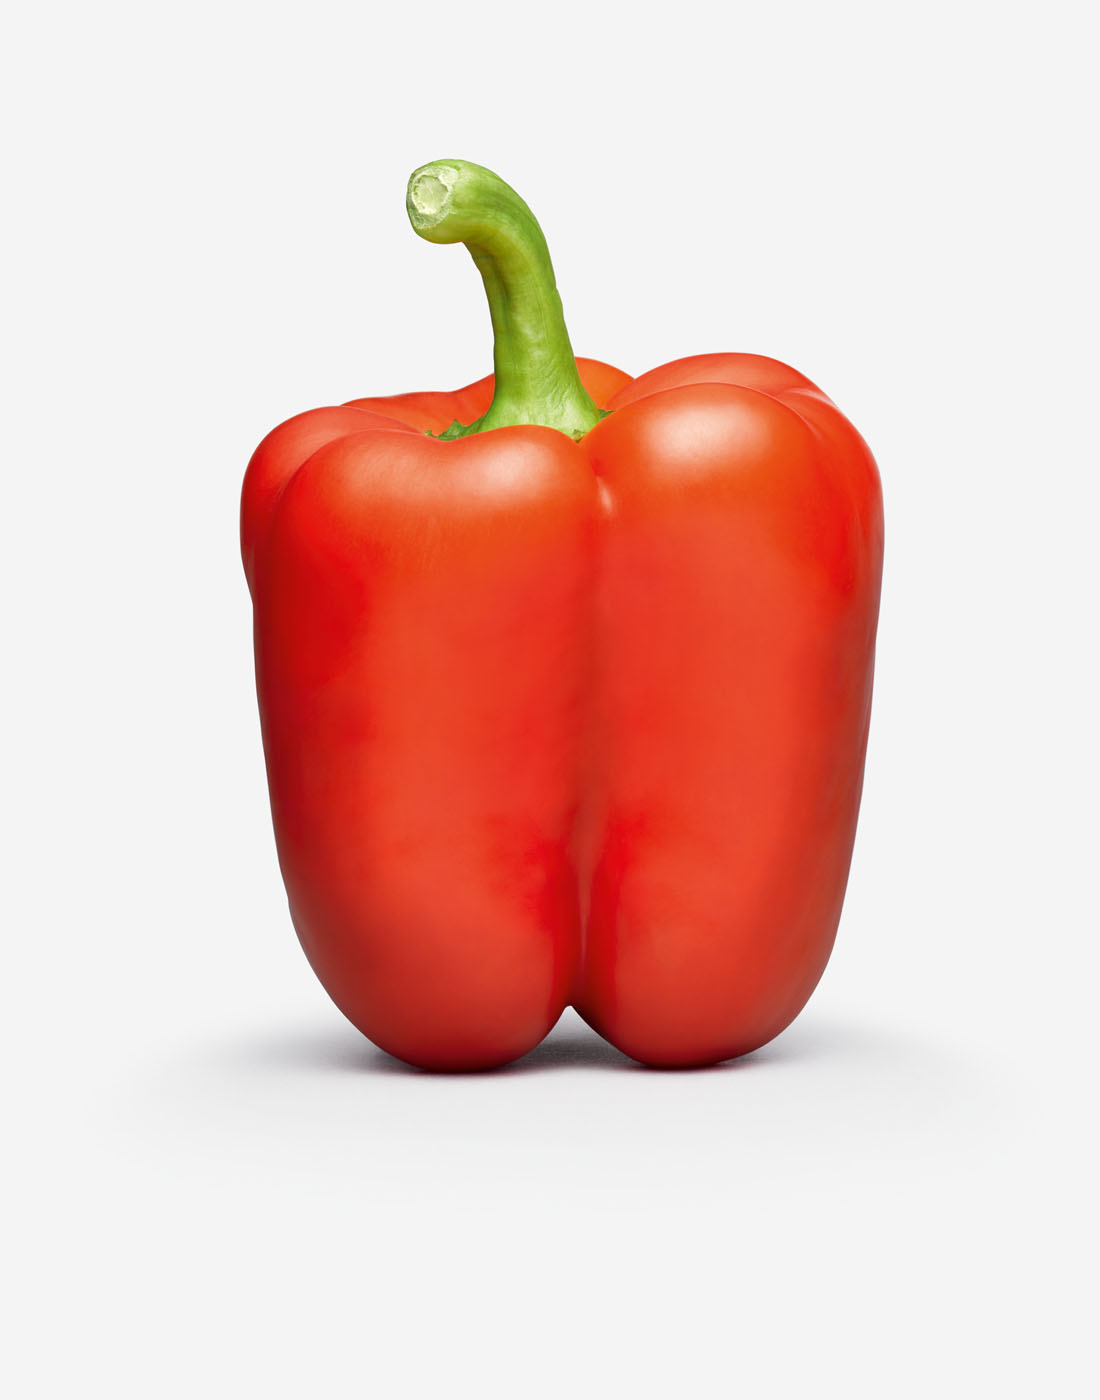 Red pepper by Alexander Kent London based still life and product photographer.